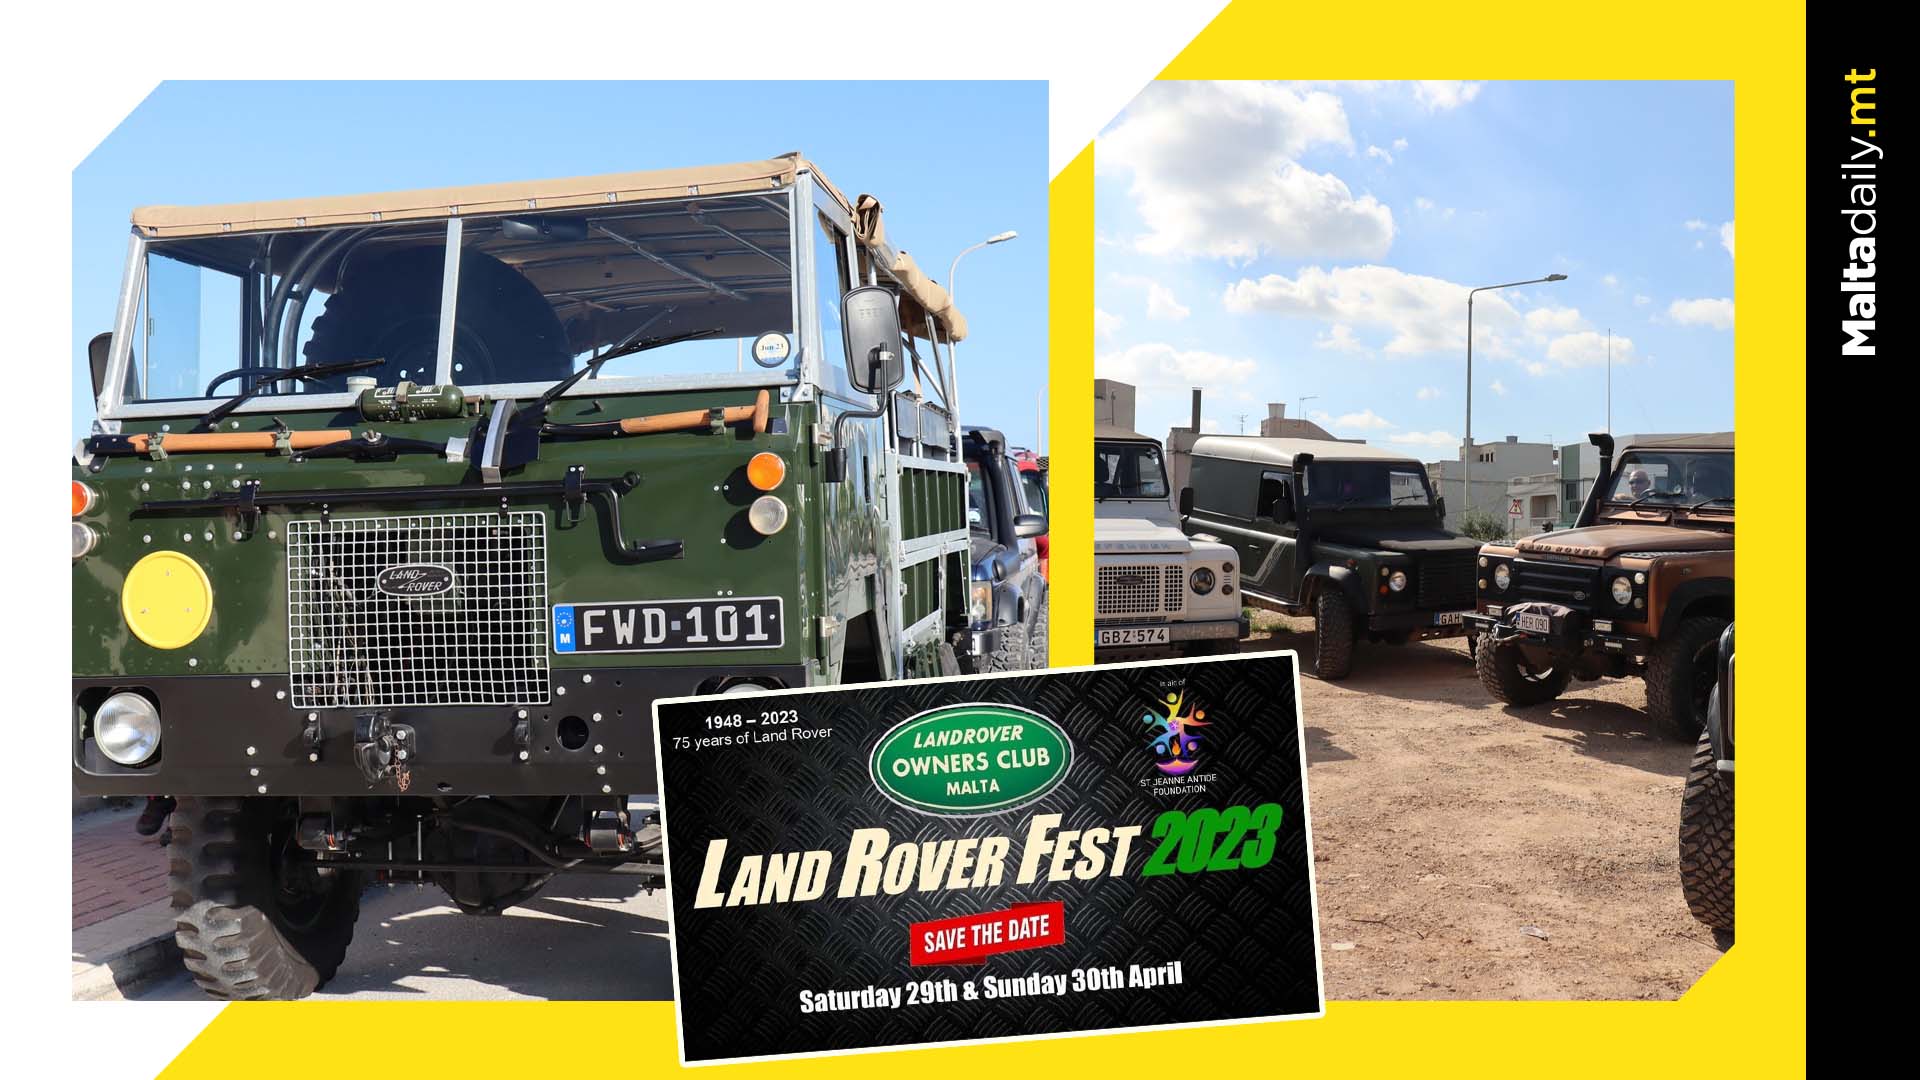 The Land Rovers Fest for charity has officially returned!